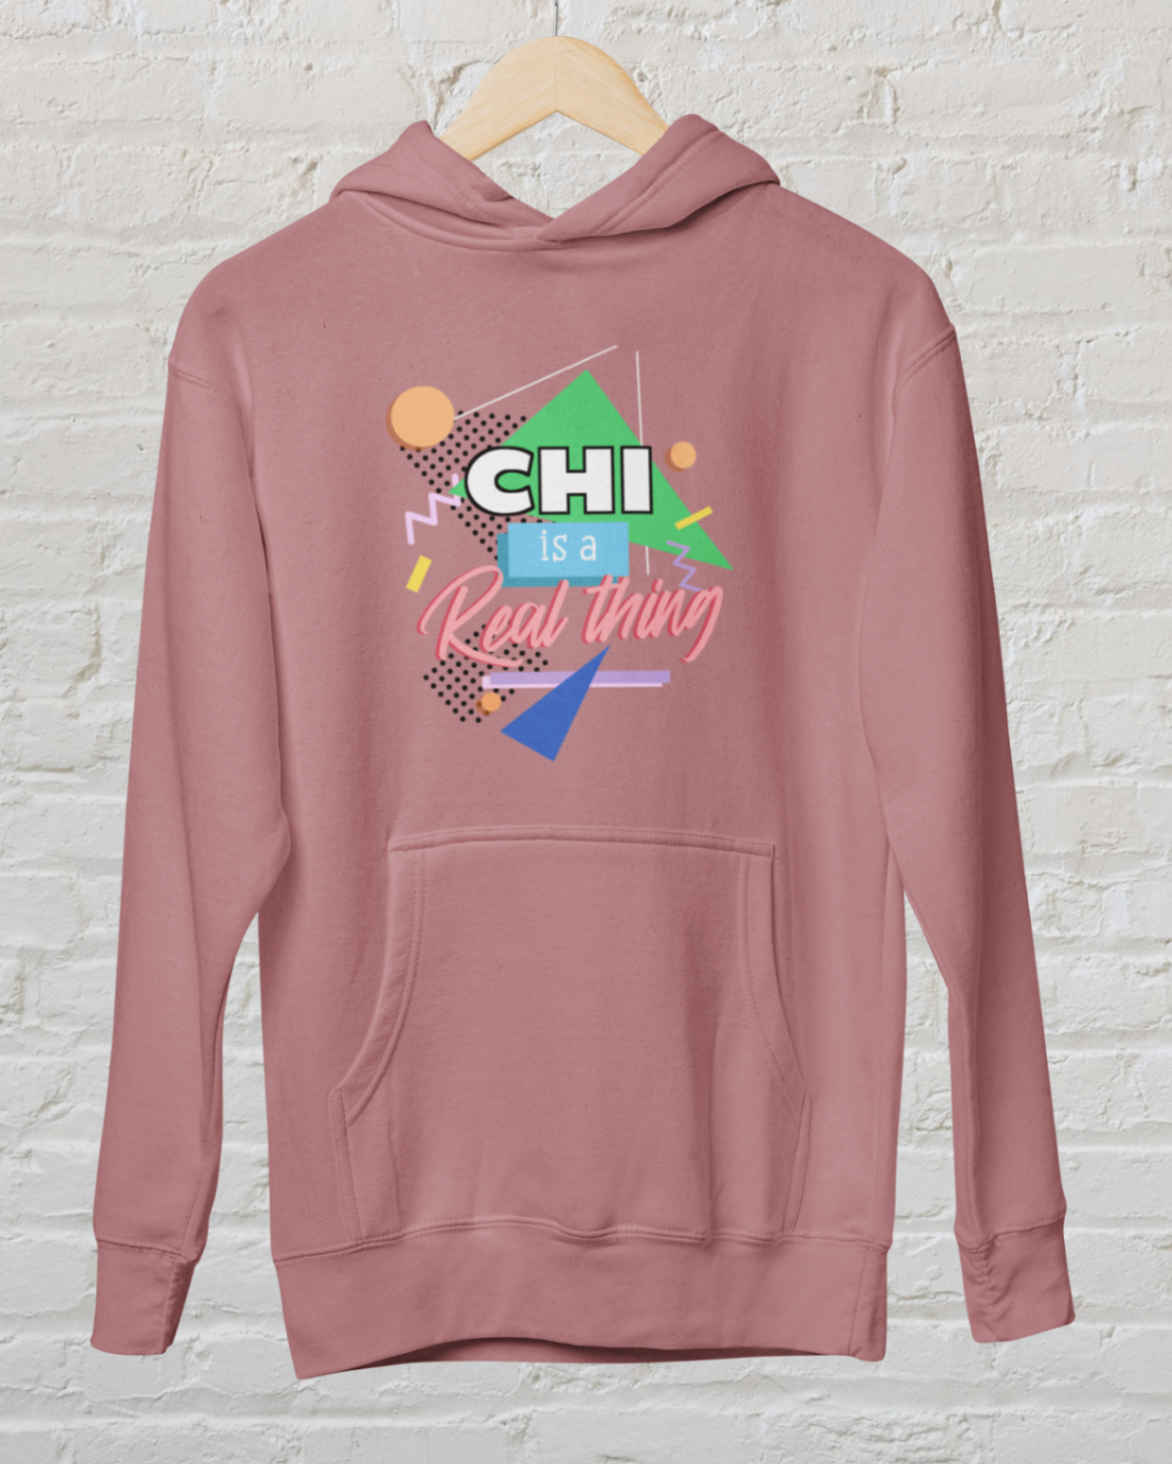 hoodie dusty rose 'Chi is a real thing' design white brick backround